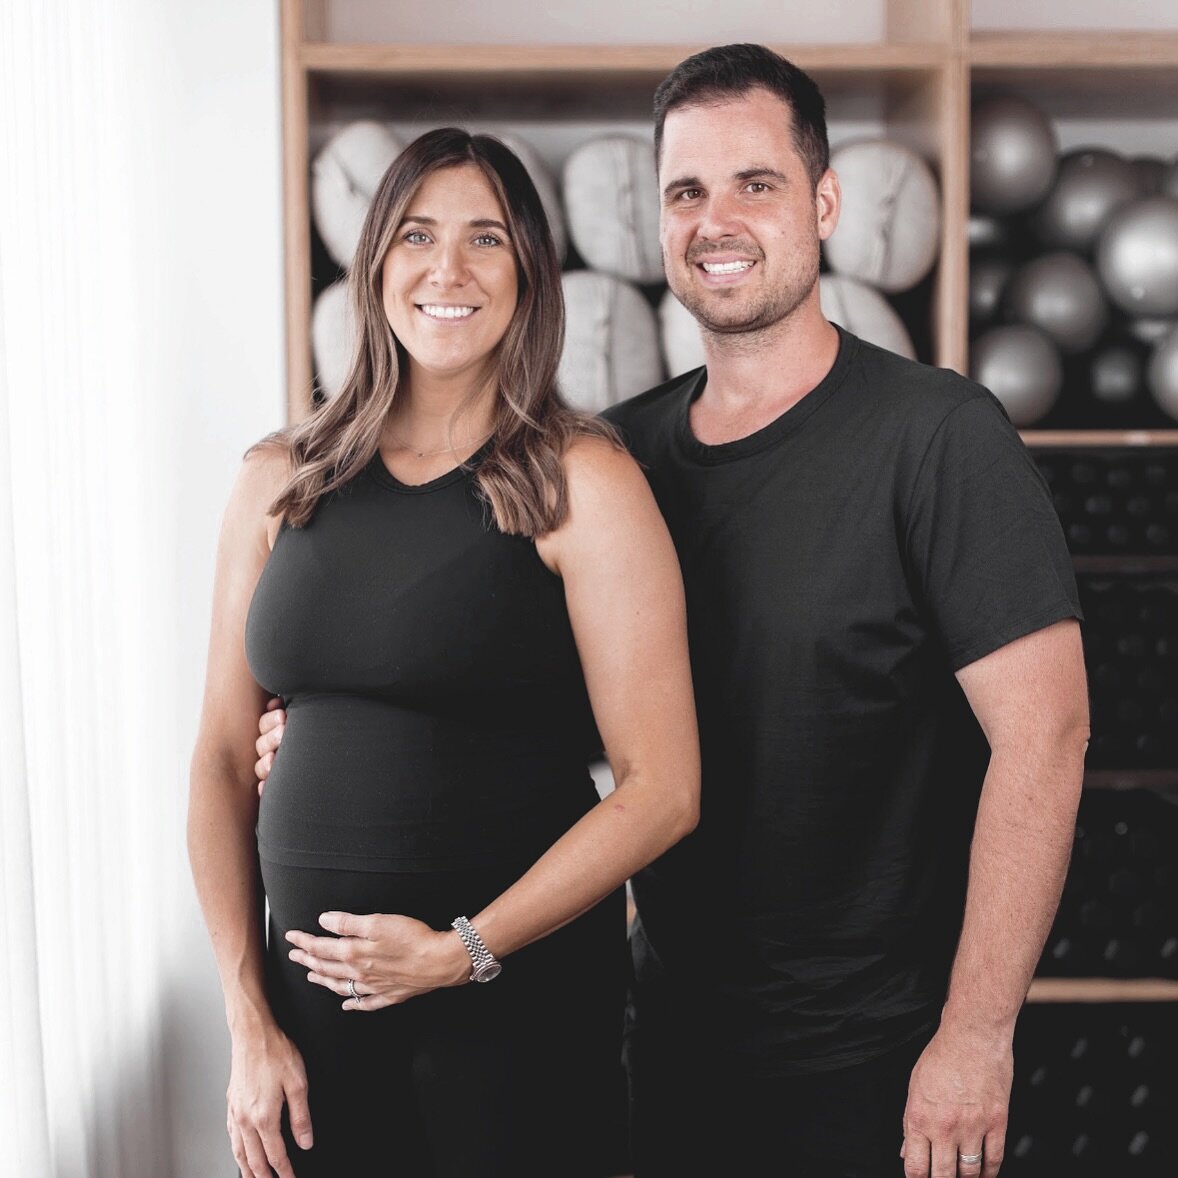 👋🏼Meet the founders &amp; faces of Sixtwo👋🏼
Hey Sixtwo fam, new clients, OG clients, followers, and soon to be clients, we are Steph &amp; Phil the founders and parents of Sixtwo Pilates &amp; Yoga. I (Steph) was a women&rsquo;s wear designer for